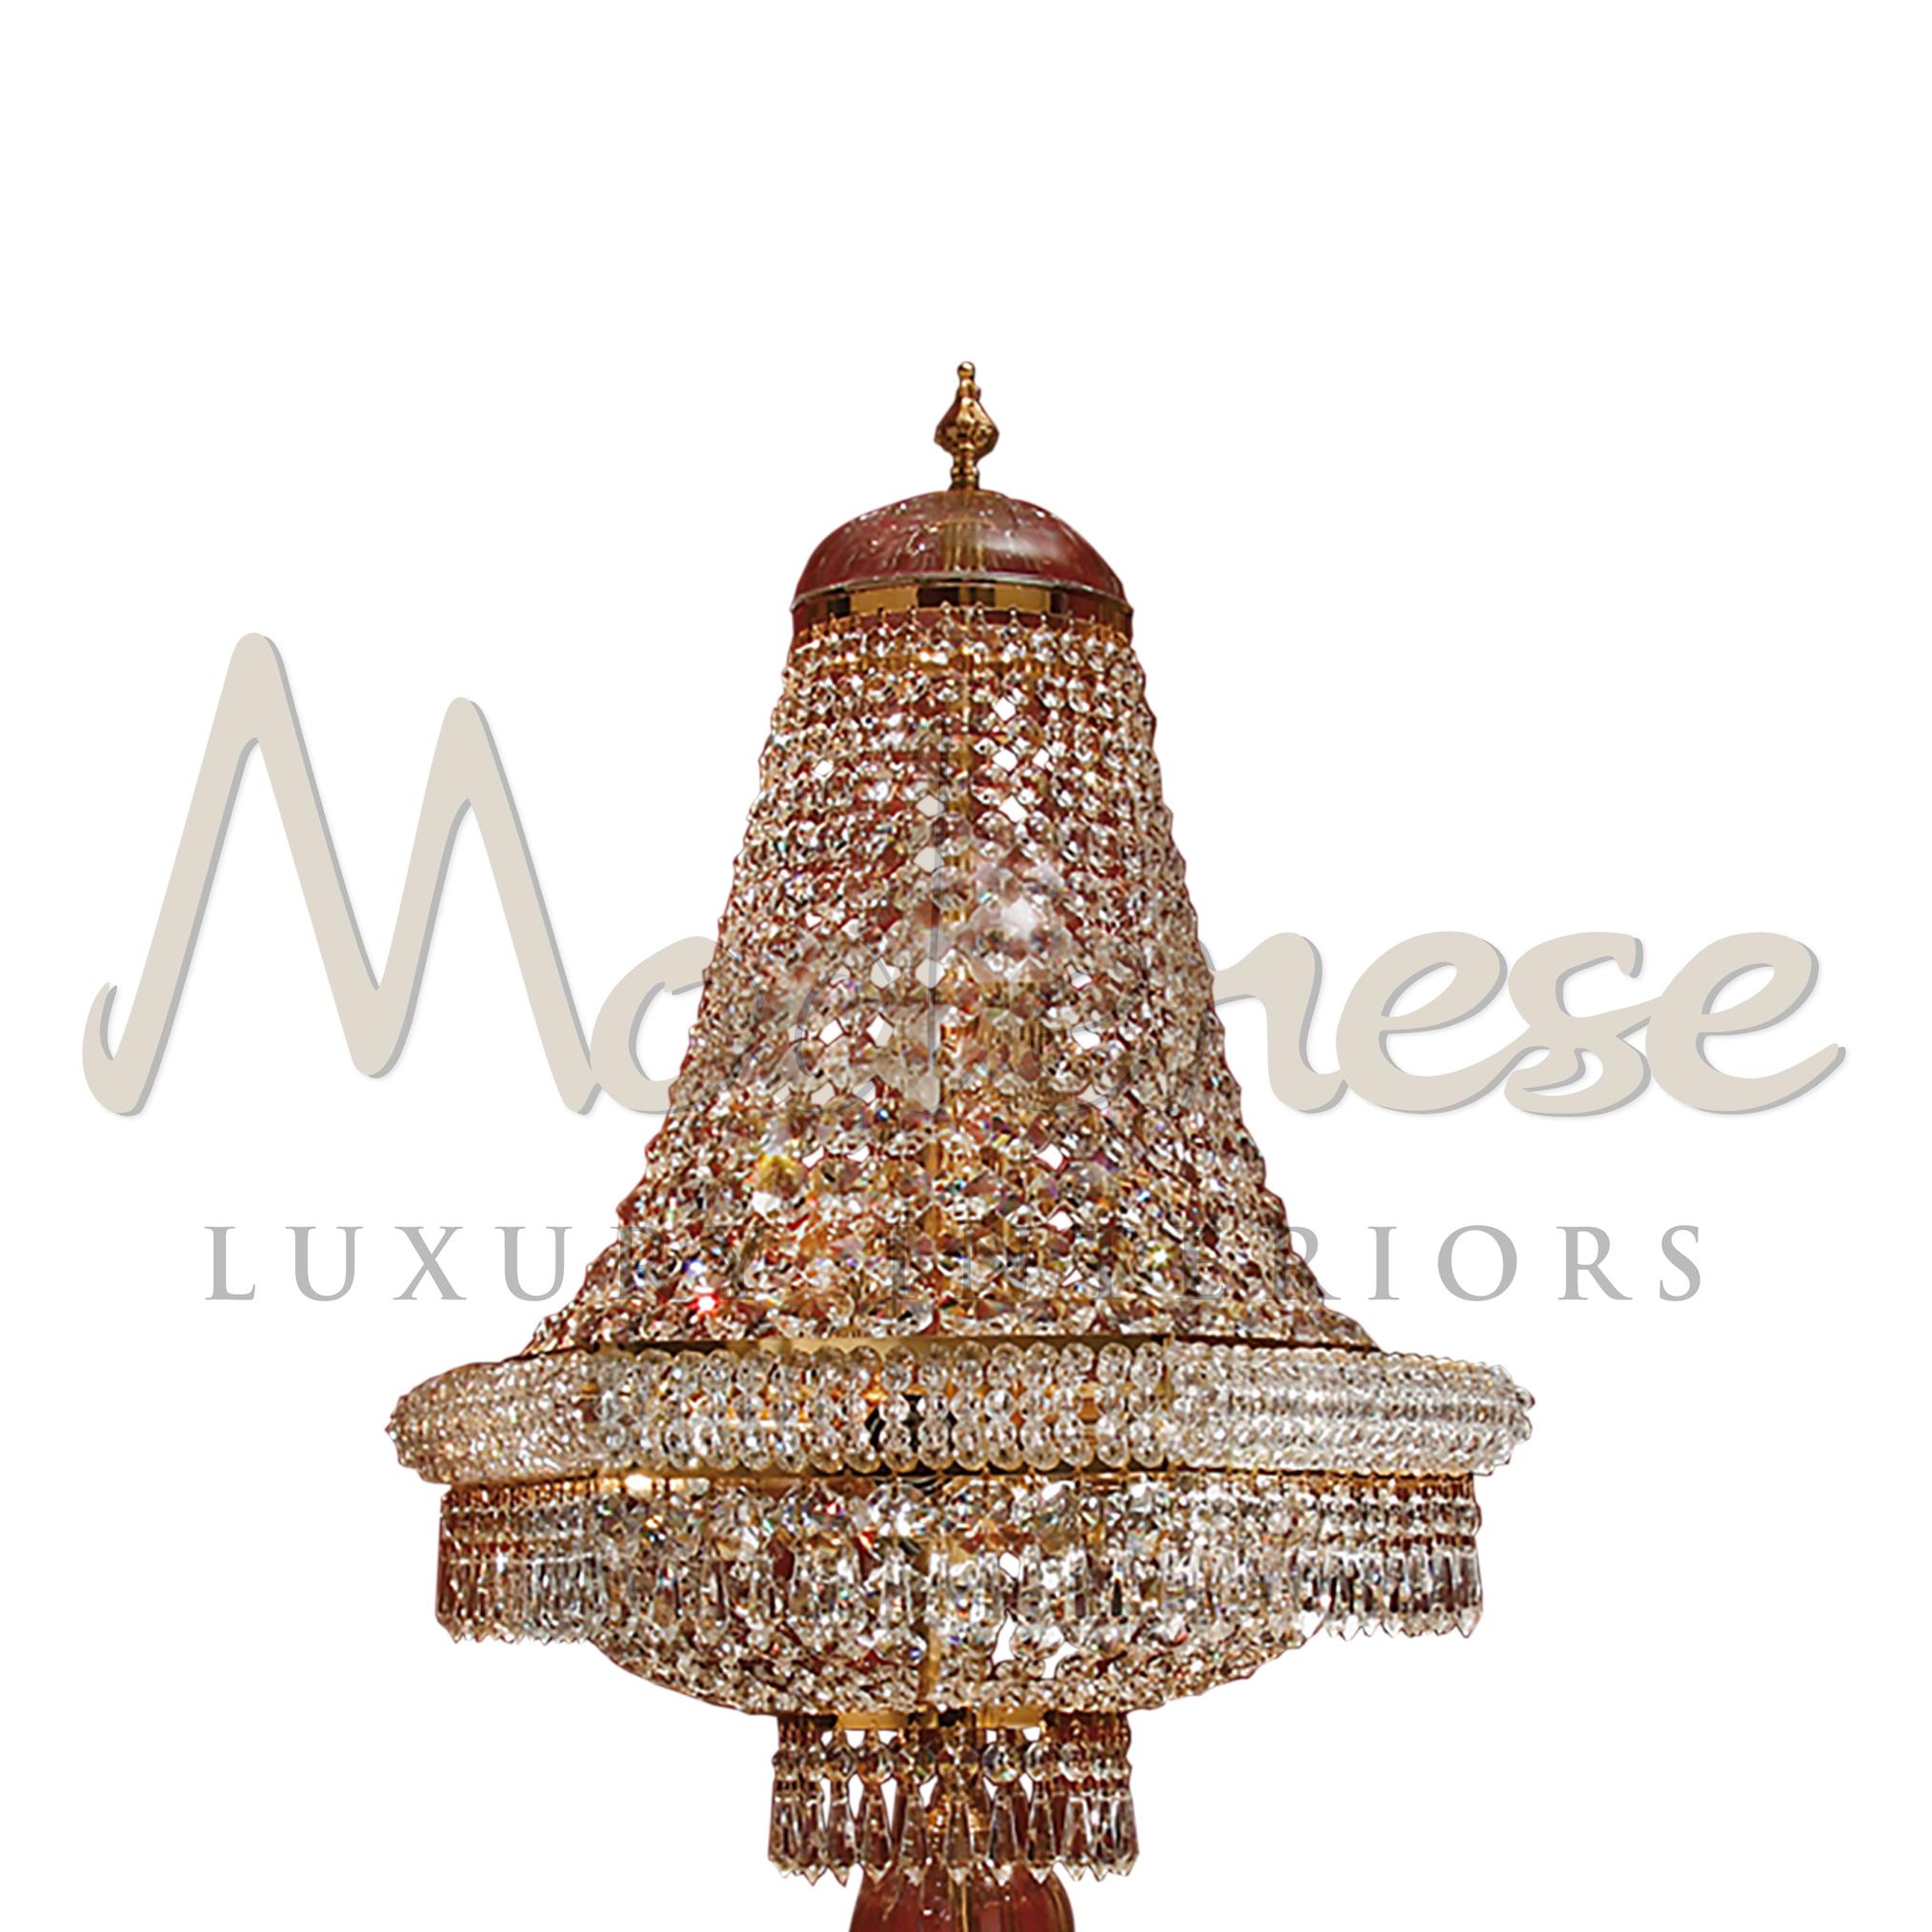 We are confident you will find the perfect table lamp for your mansion with this 9 lights table lamp by Modenese Luxury Interiors finished in 24kt gold plated and Scholer crystal. This model requires 9 single E14 screw fit light bulbs (60Watt max).